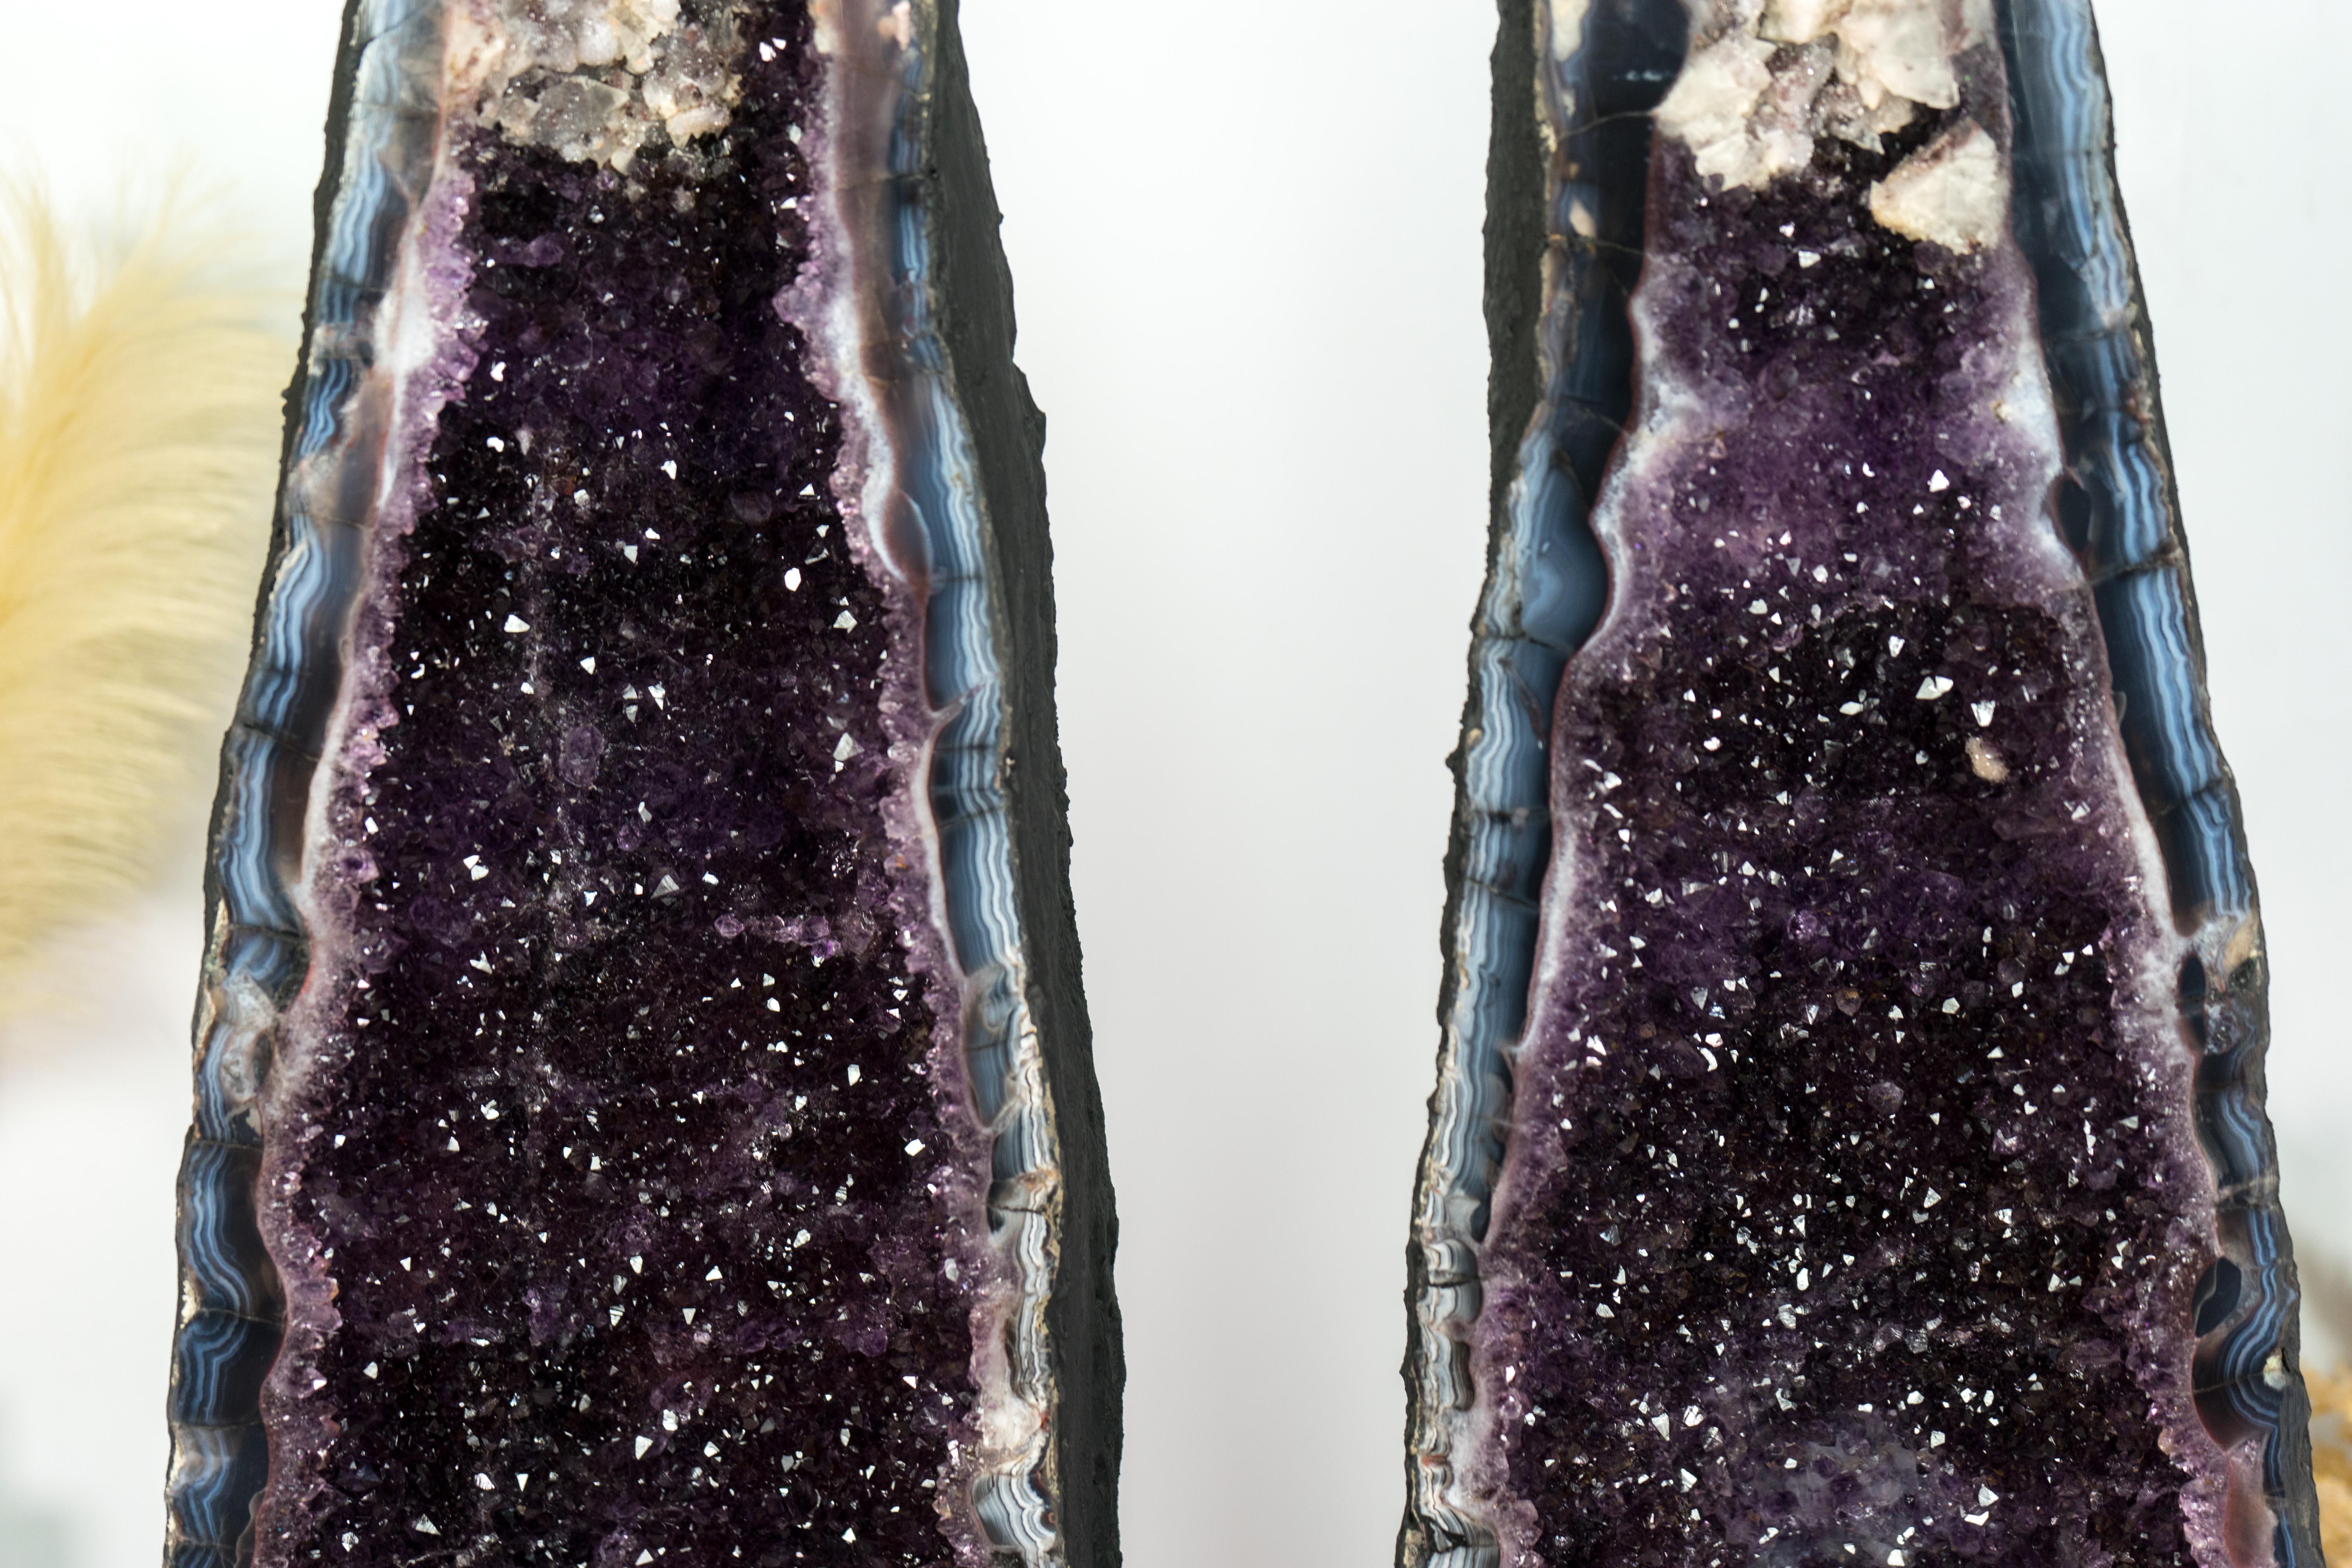 Pair of Amethyst Cathedral Geodes, with Lace Agate, Purple Amethyst, and Calcite For Sale 2